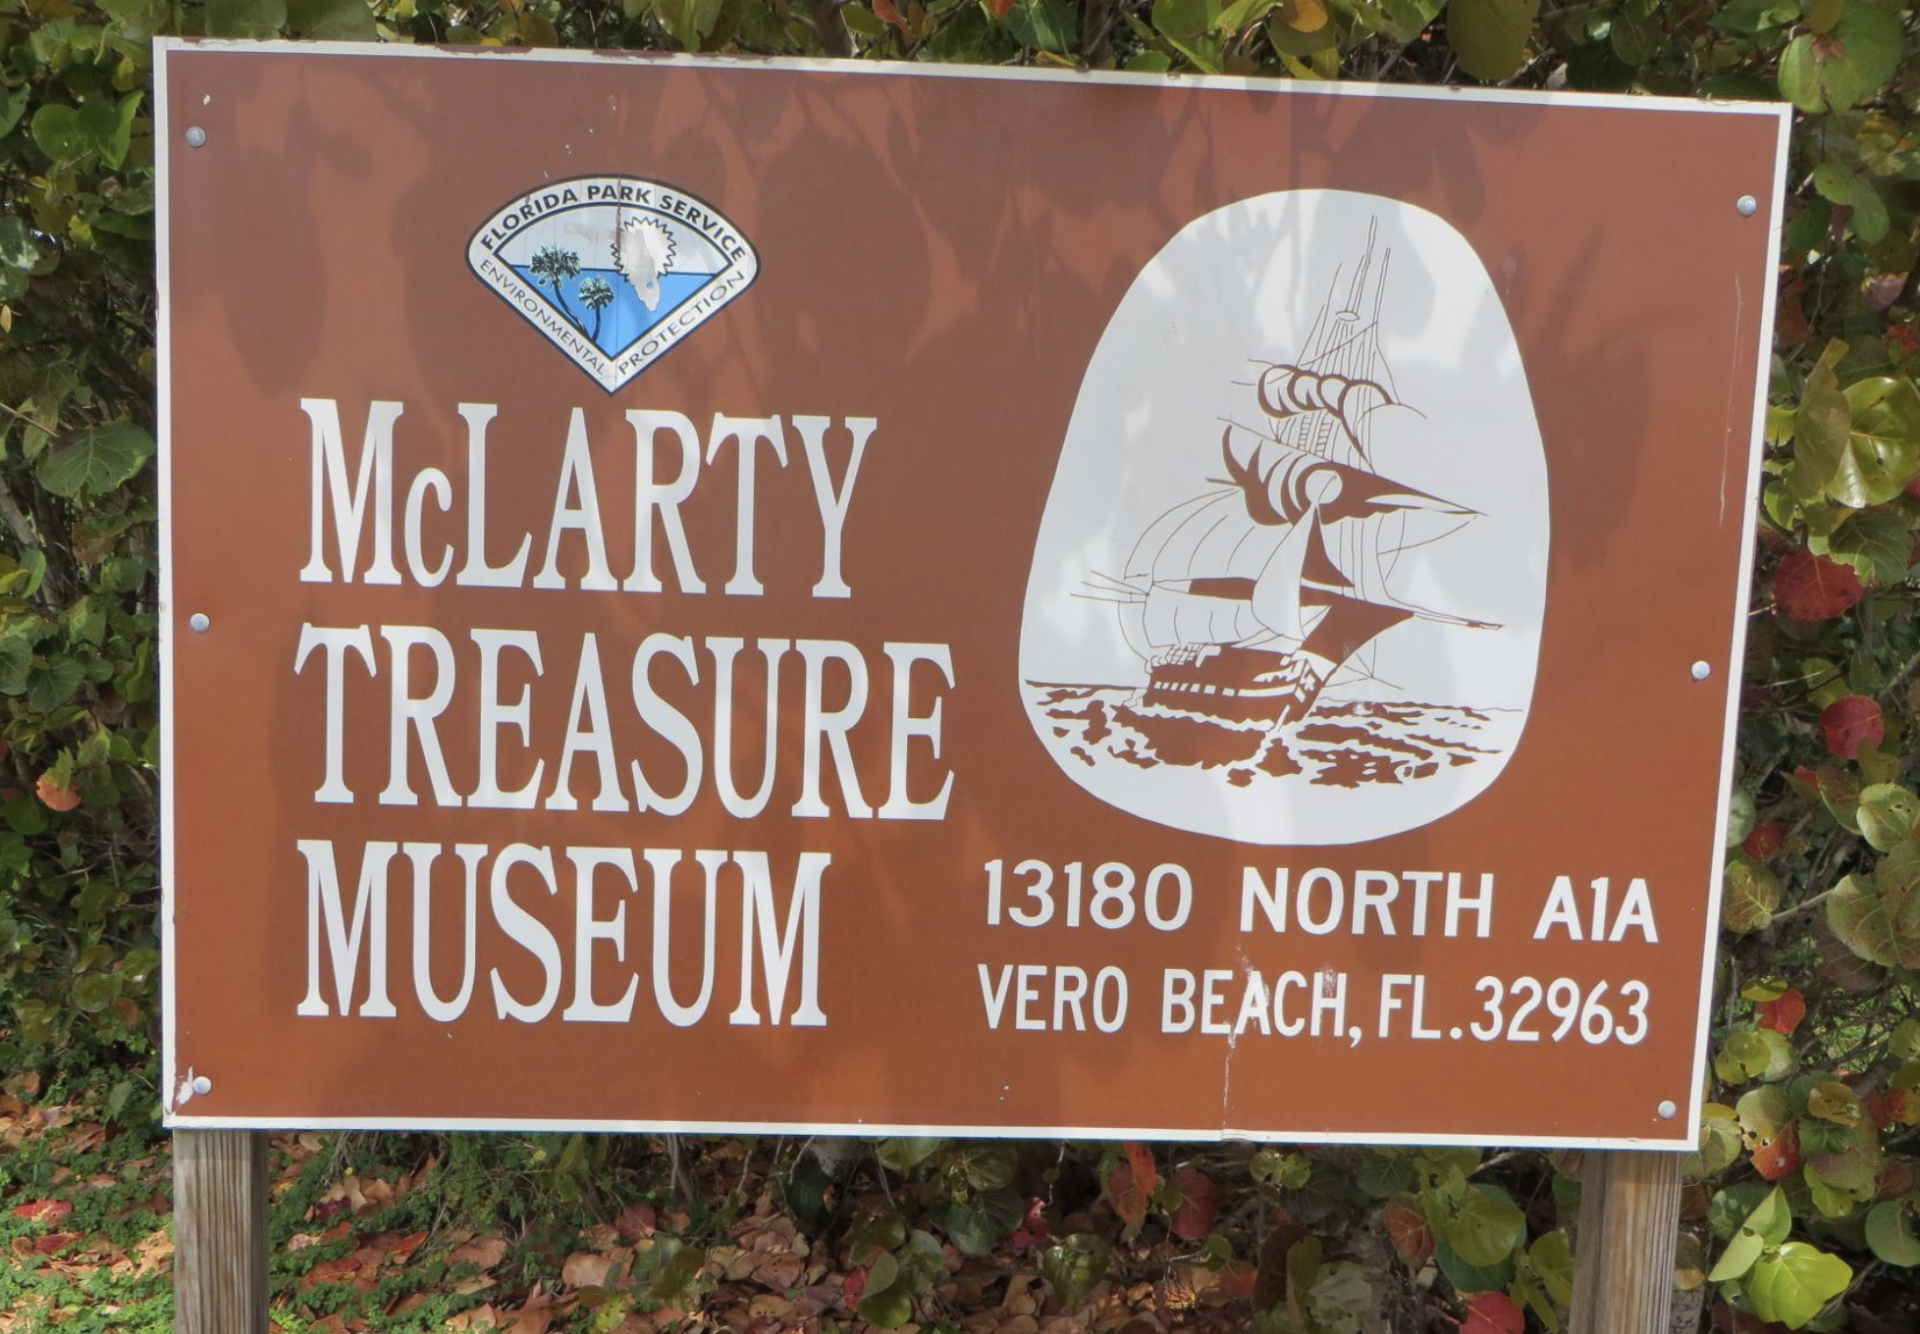 McLarty Treasure Museum sign. Read reviews on Trip Advisor. This link opens new window.